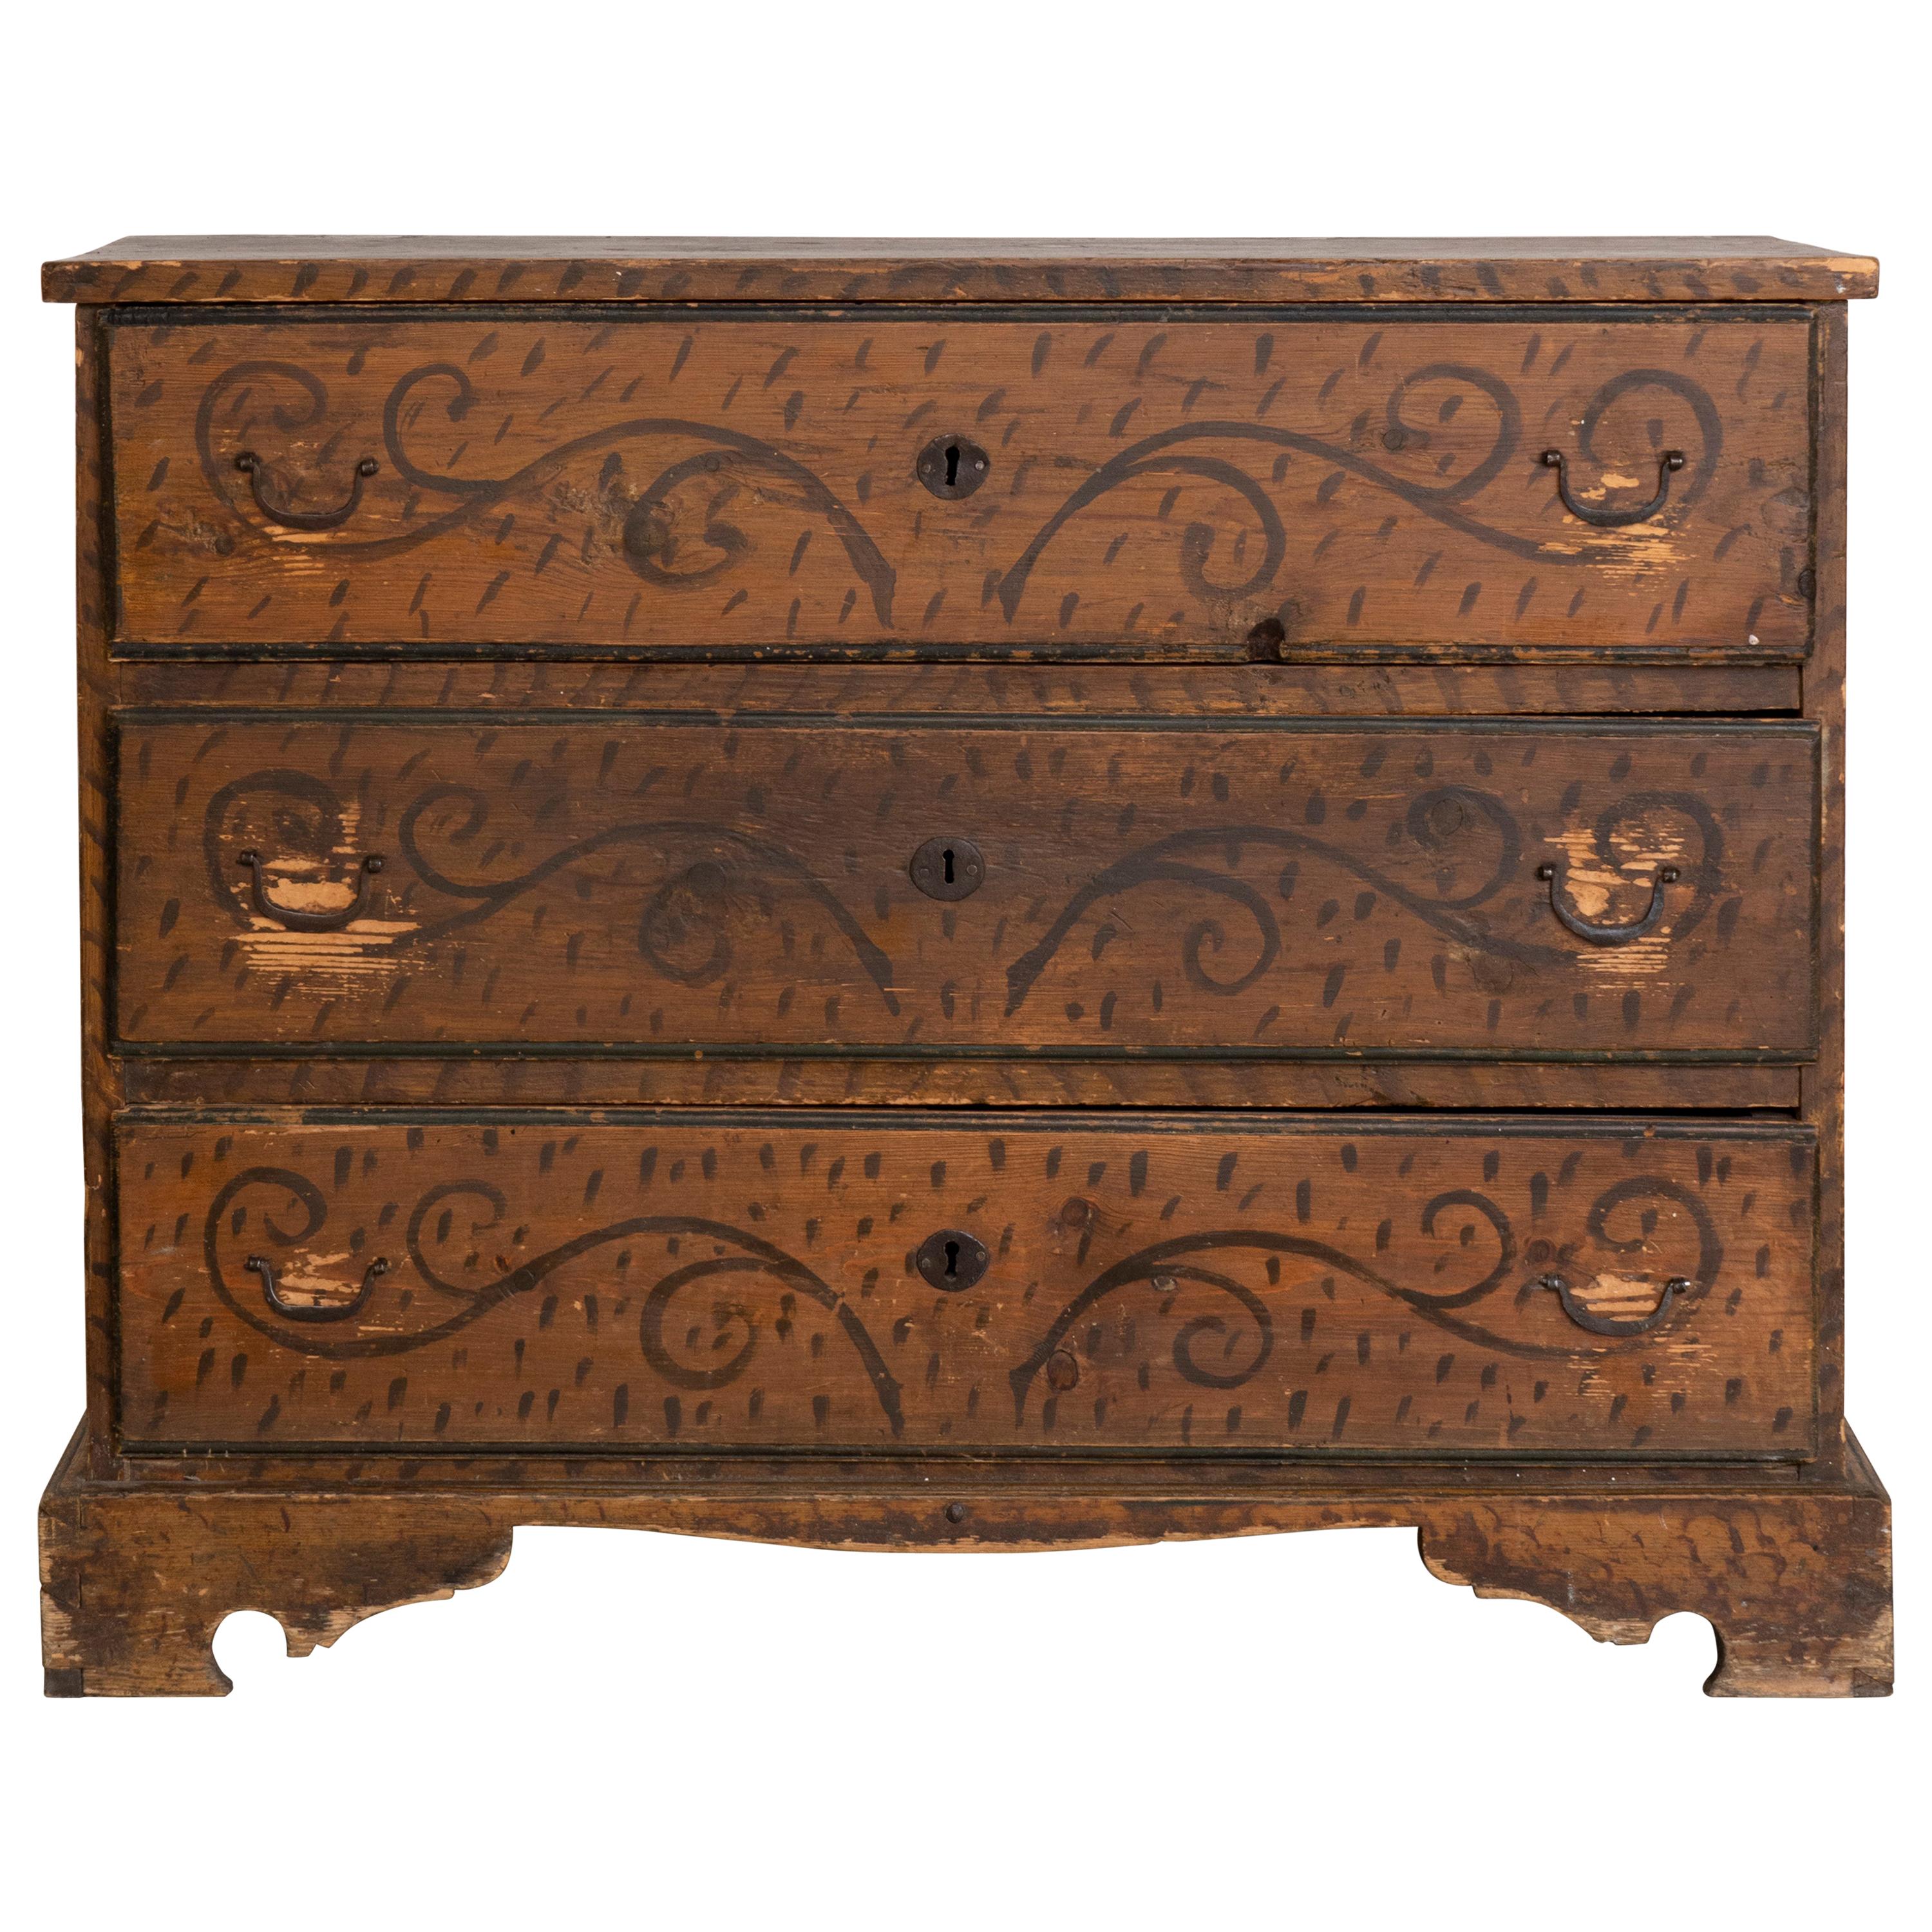 19th Century American Folk Painted Chest of Drawers